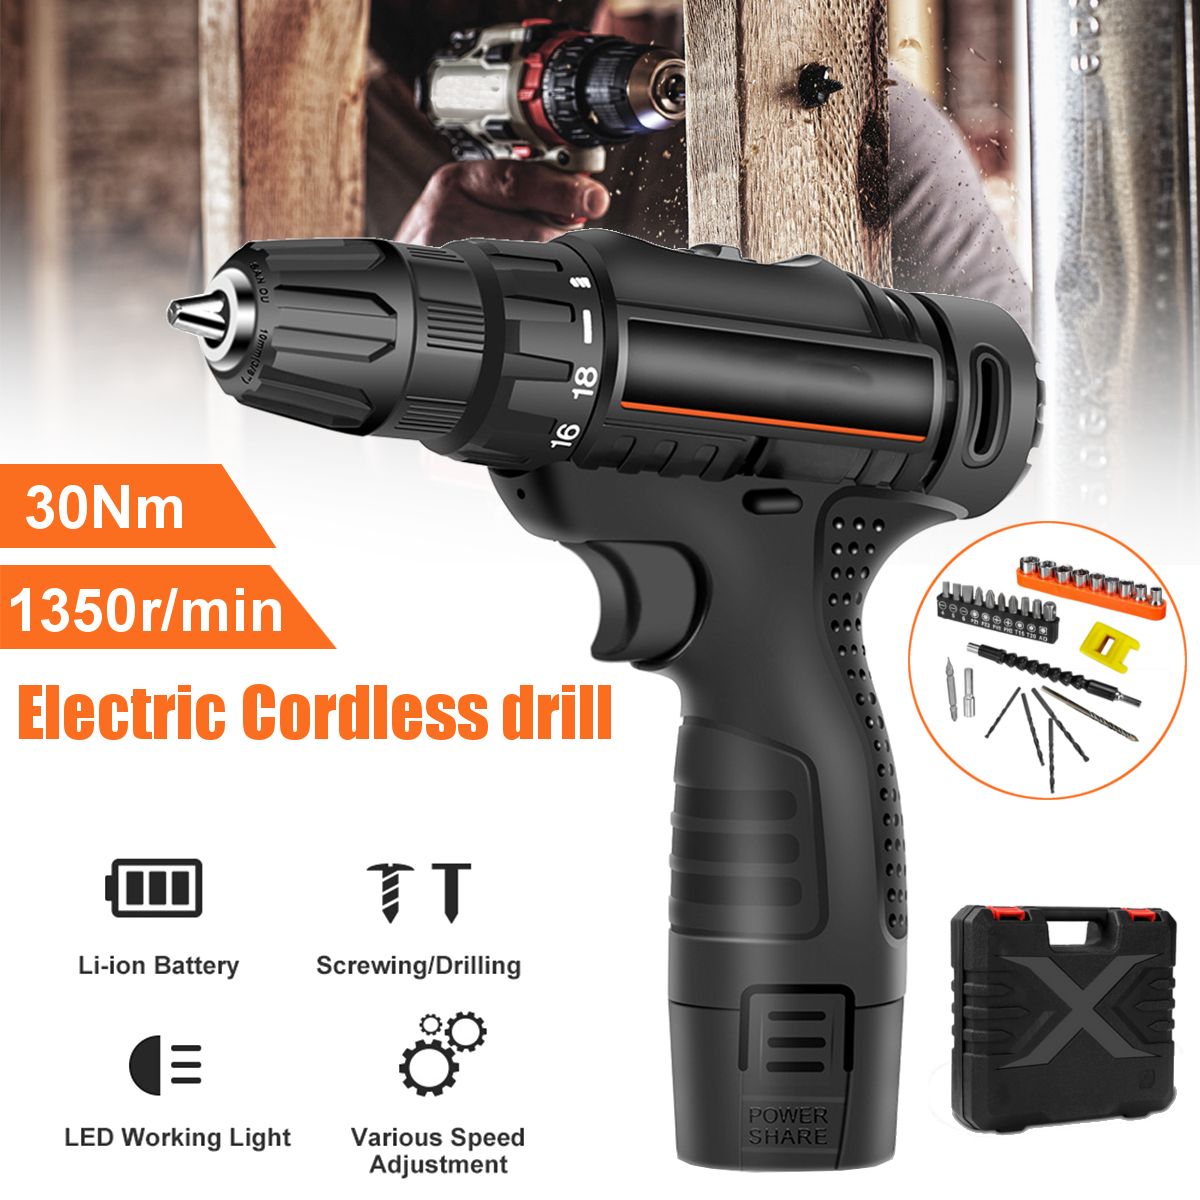 12V-38-30Nm-Electric-Cordless-Drill-Driver-2-Speeds-LED-Electric-Screwdriver-W-Battery-1761116